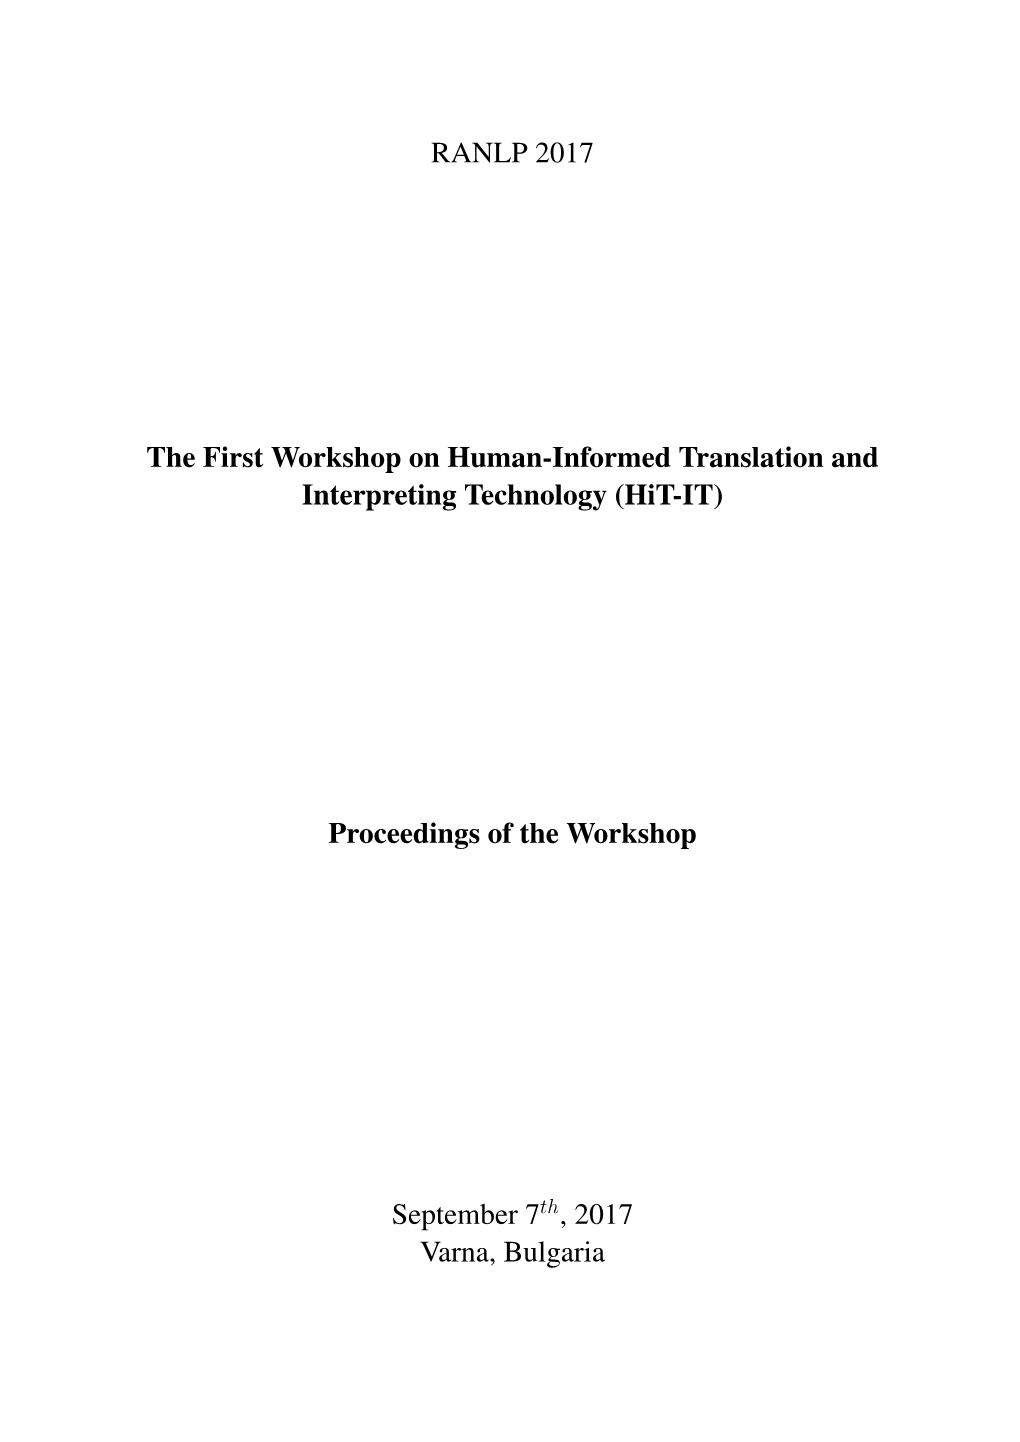 The Proceedings of the First Workshop on Human-Informed